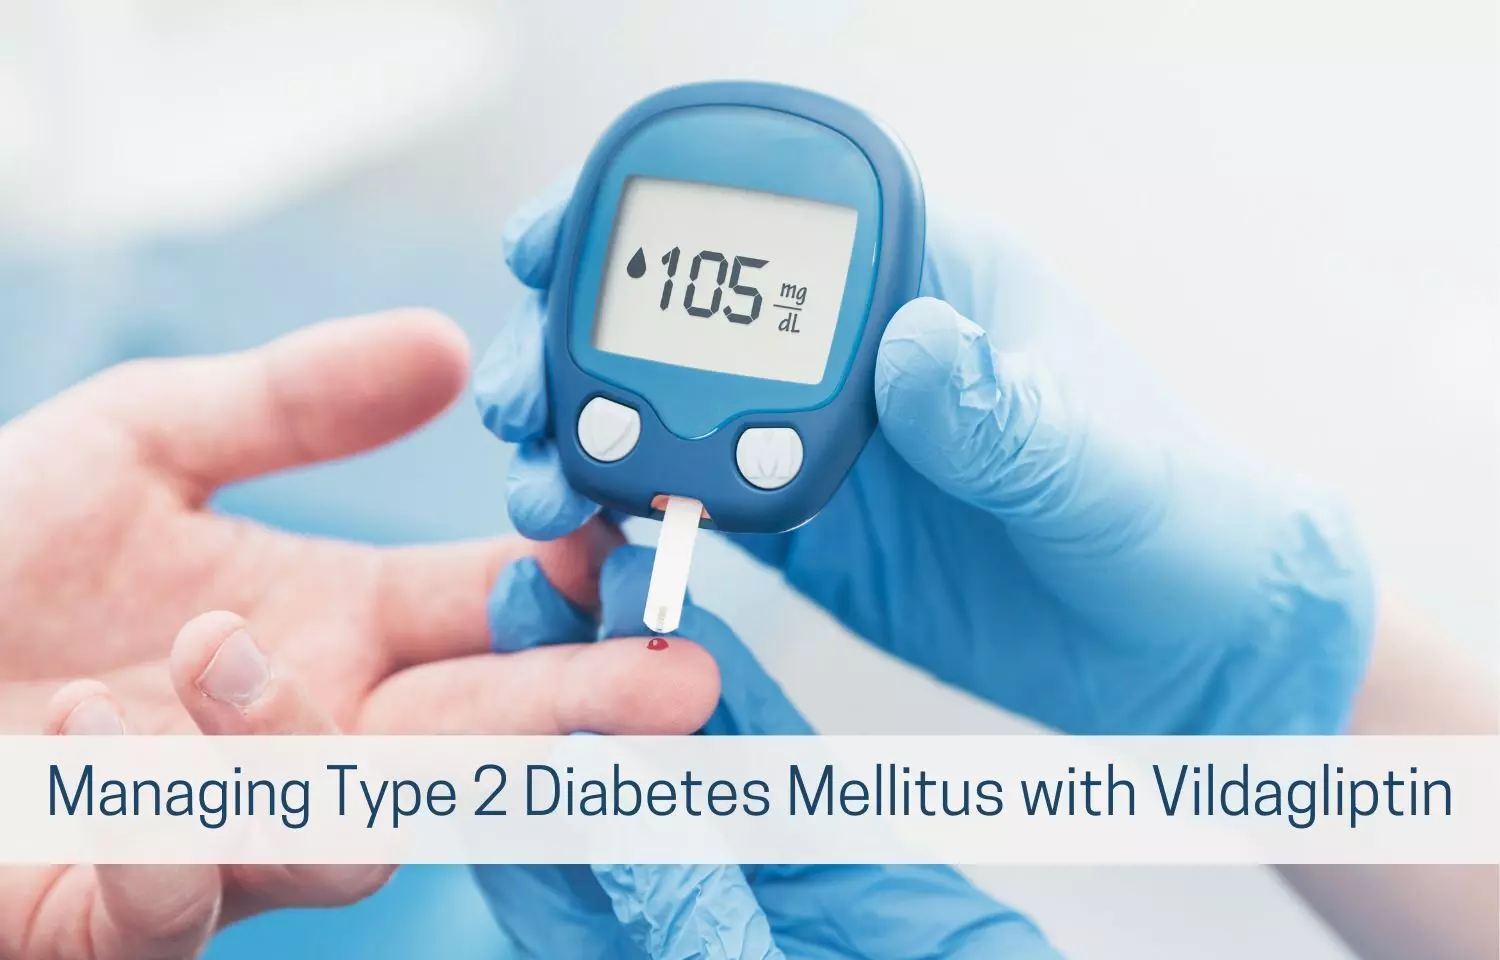 Once Daily Vildagliptin 100 mg sustained-release therapeutically safe, effective as Vildagliptin 50 mg twice daily add on to Metformin in Indian Diabetics